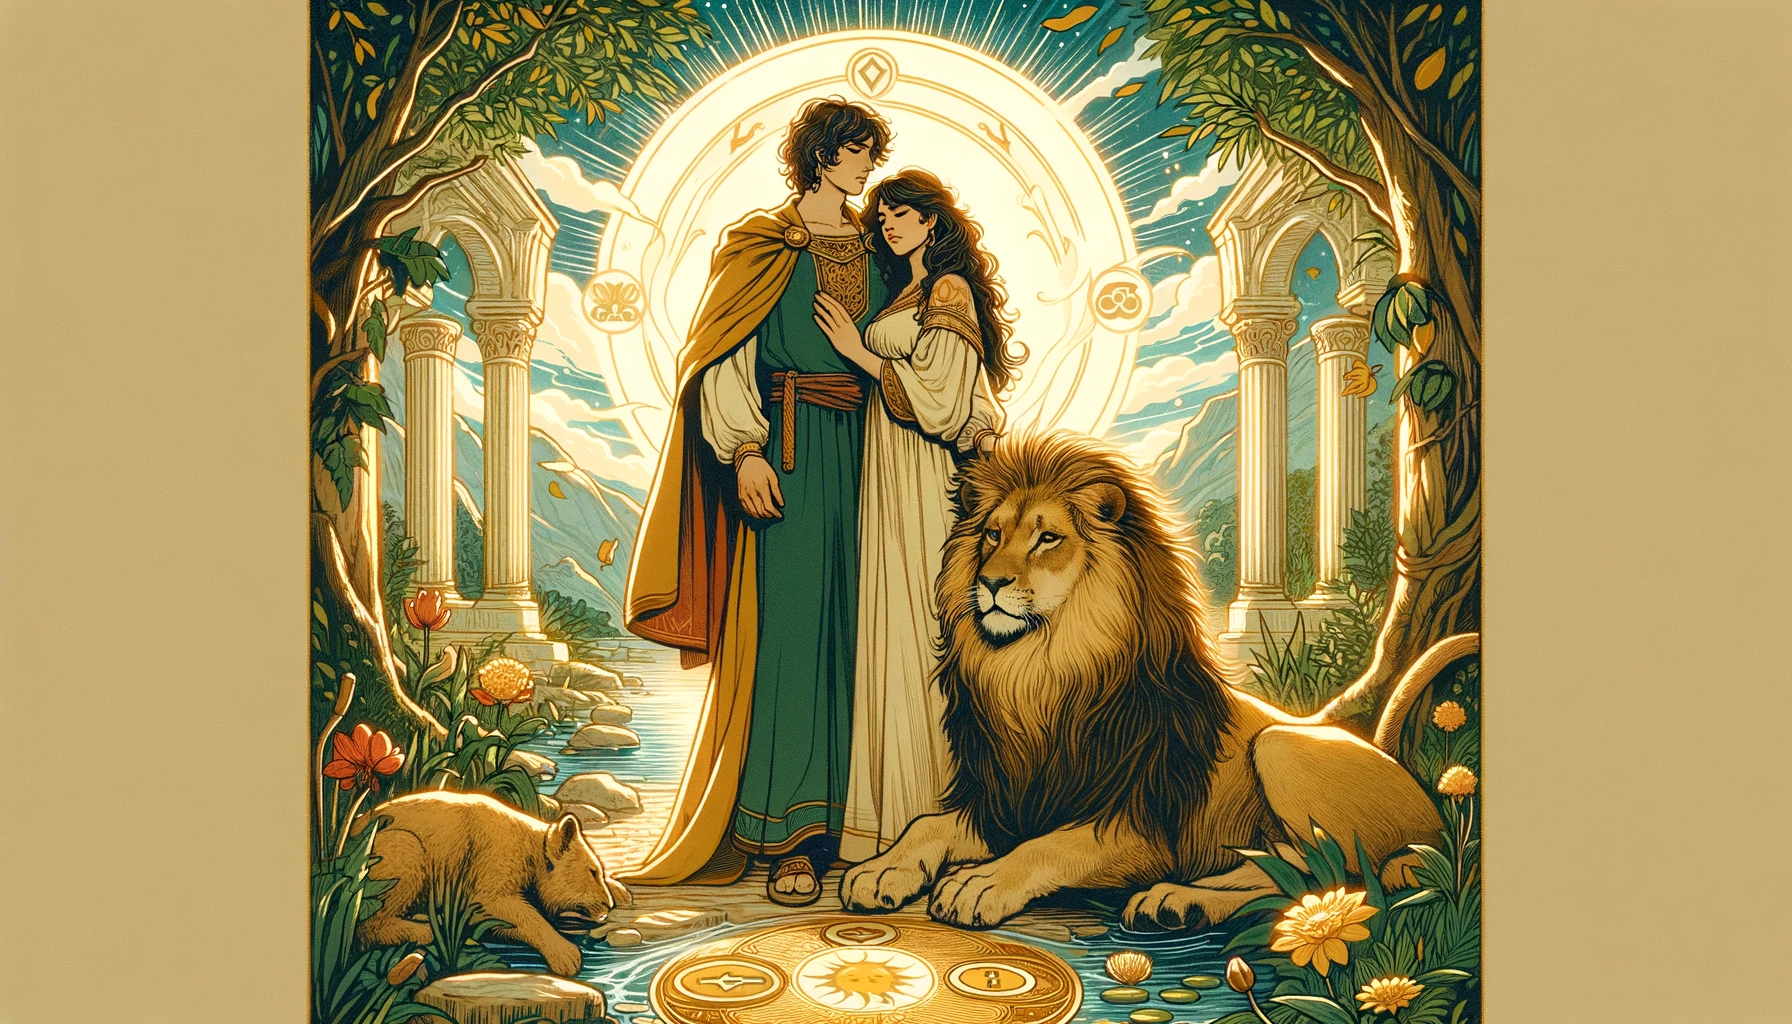 "In this visualization, a couple stands united in mutual support with a lion, symbolizing the mastery of challenges through understanding and gentle force, set in a peaceful and lush environment signifying the growth and stability from a relationship built on strong emotional foundations. The atmosphere of harmony and empowerment is conveyed through a vibrant color palette, reflecting the nurturing and uplifting aspects of love that triumph over adversity. Through its imagery, viewers are invited to contemplate the strength and resilience found in supportive relationships."